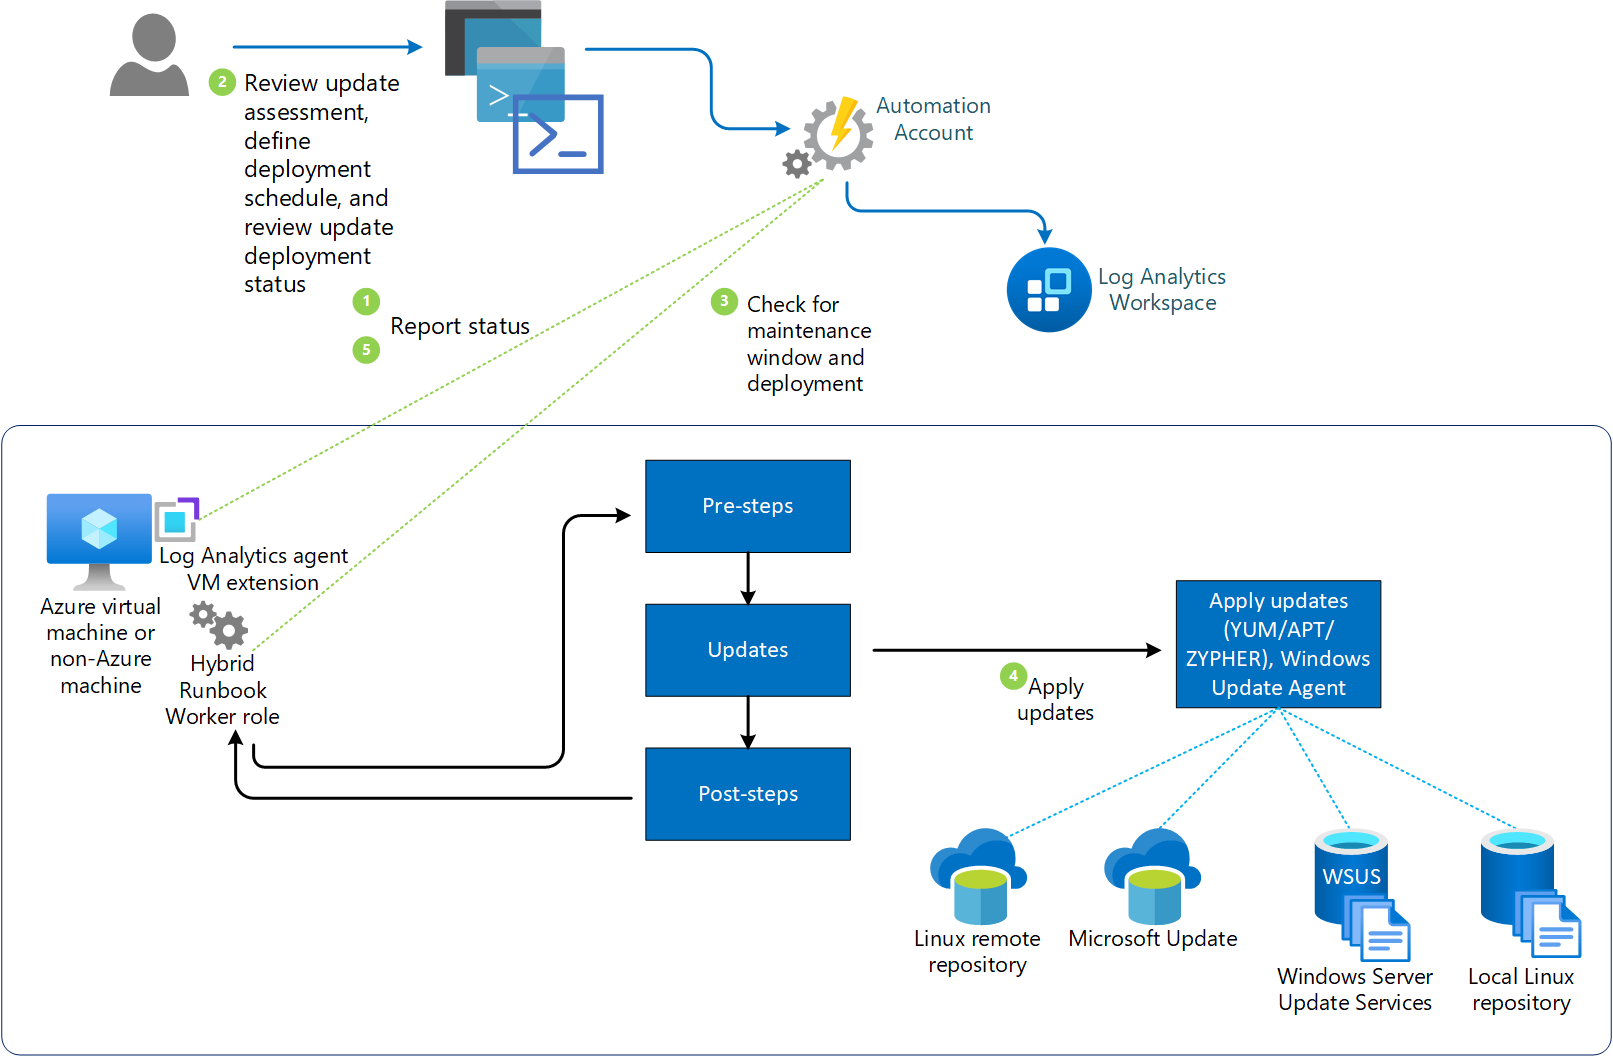 Azure Automation Account Template Download And Deploy To New Subscription